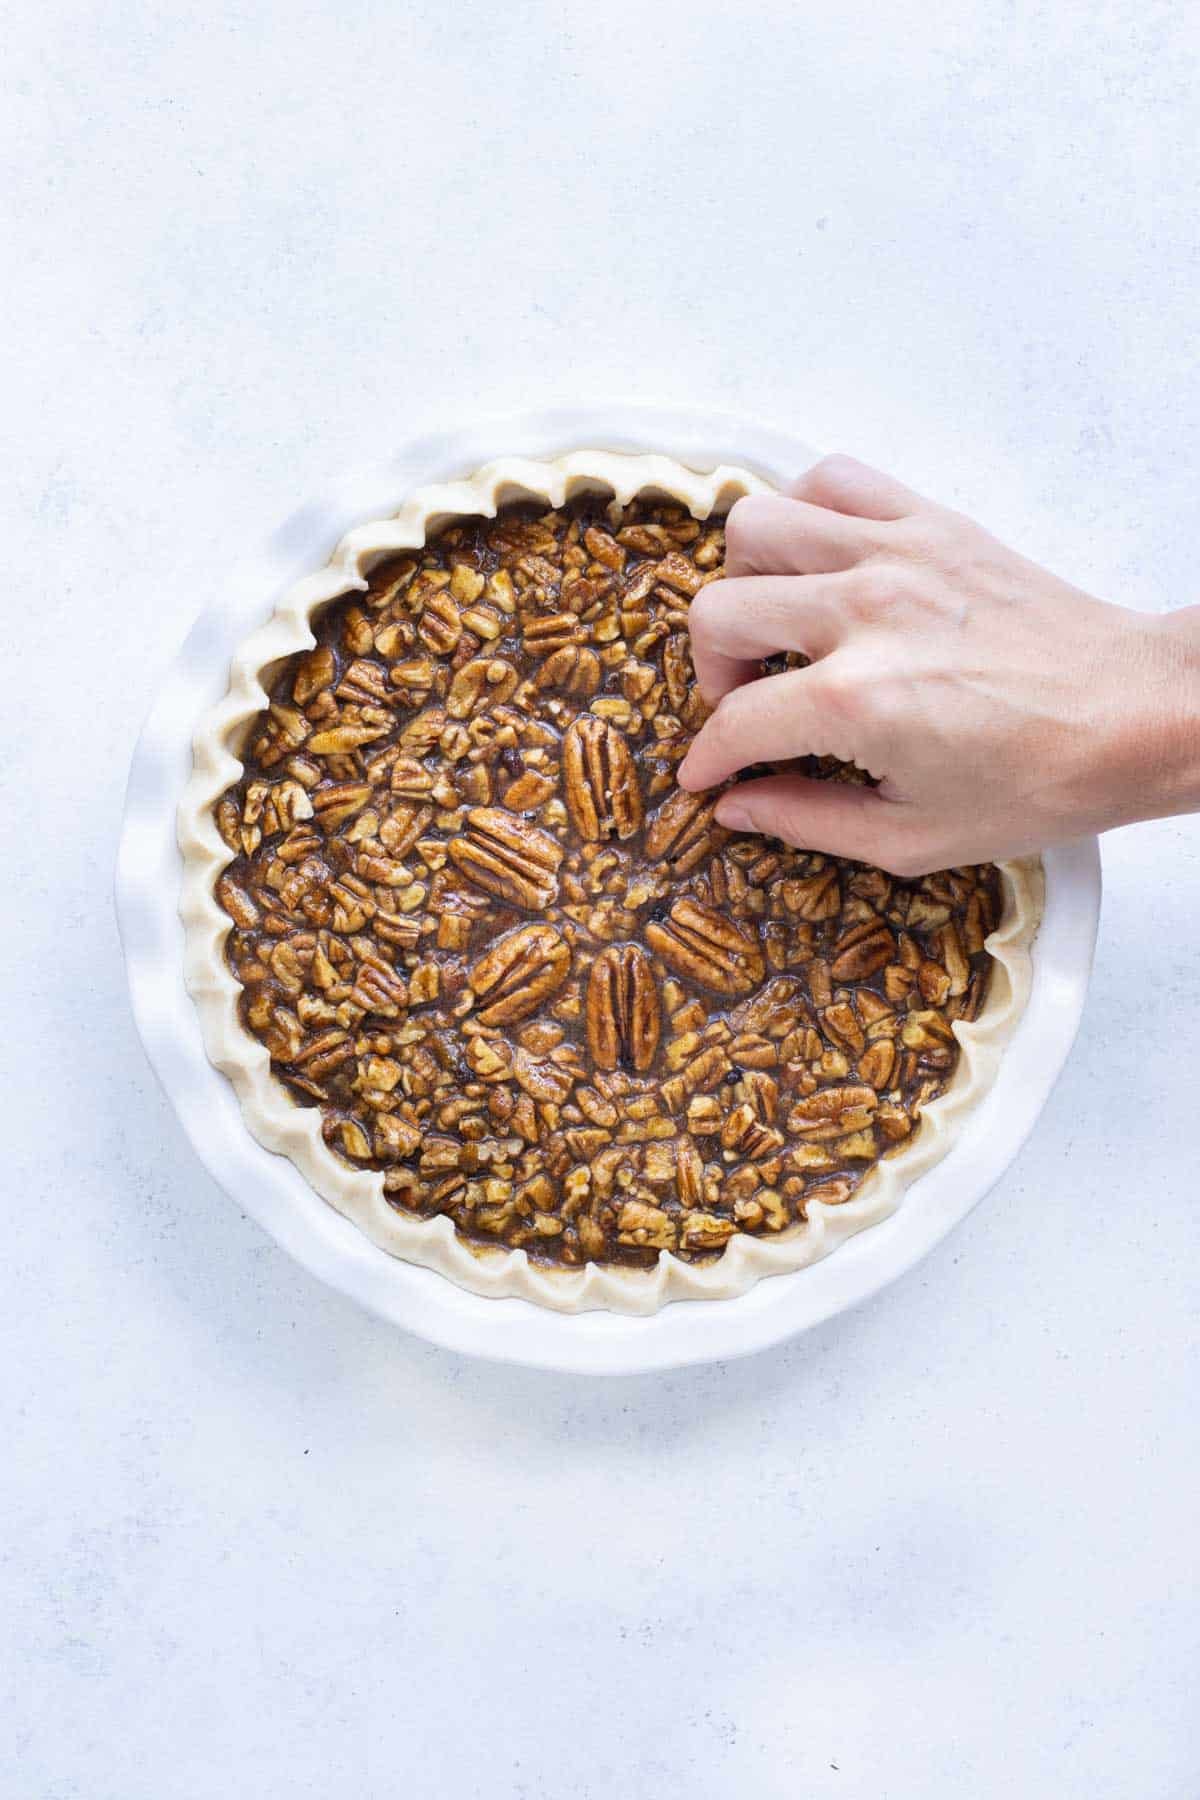 Whole pecan pieces are set out to decorate the center of the pie.